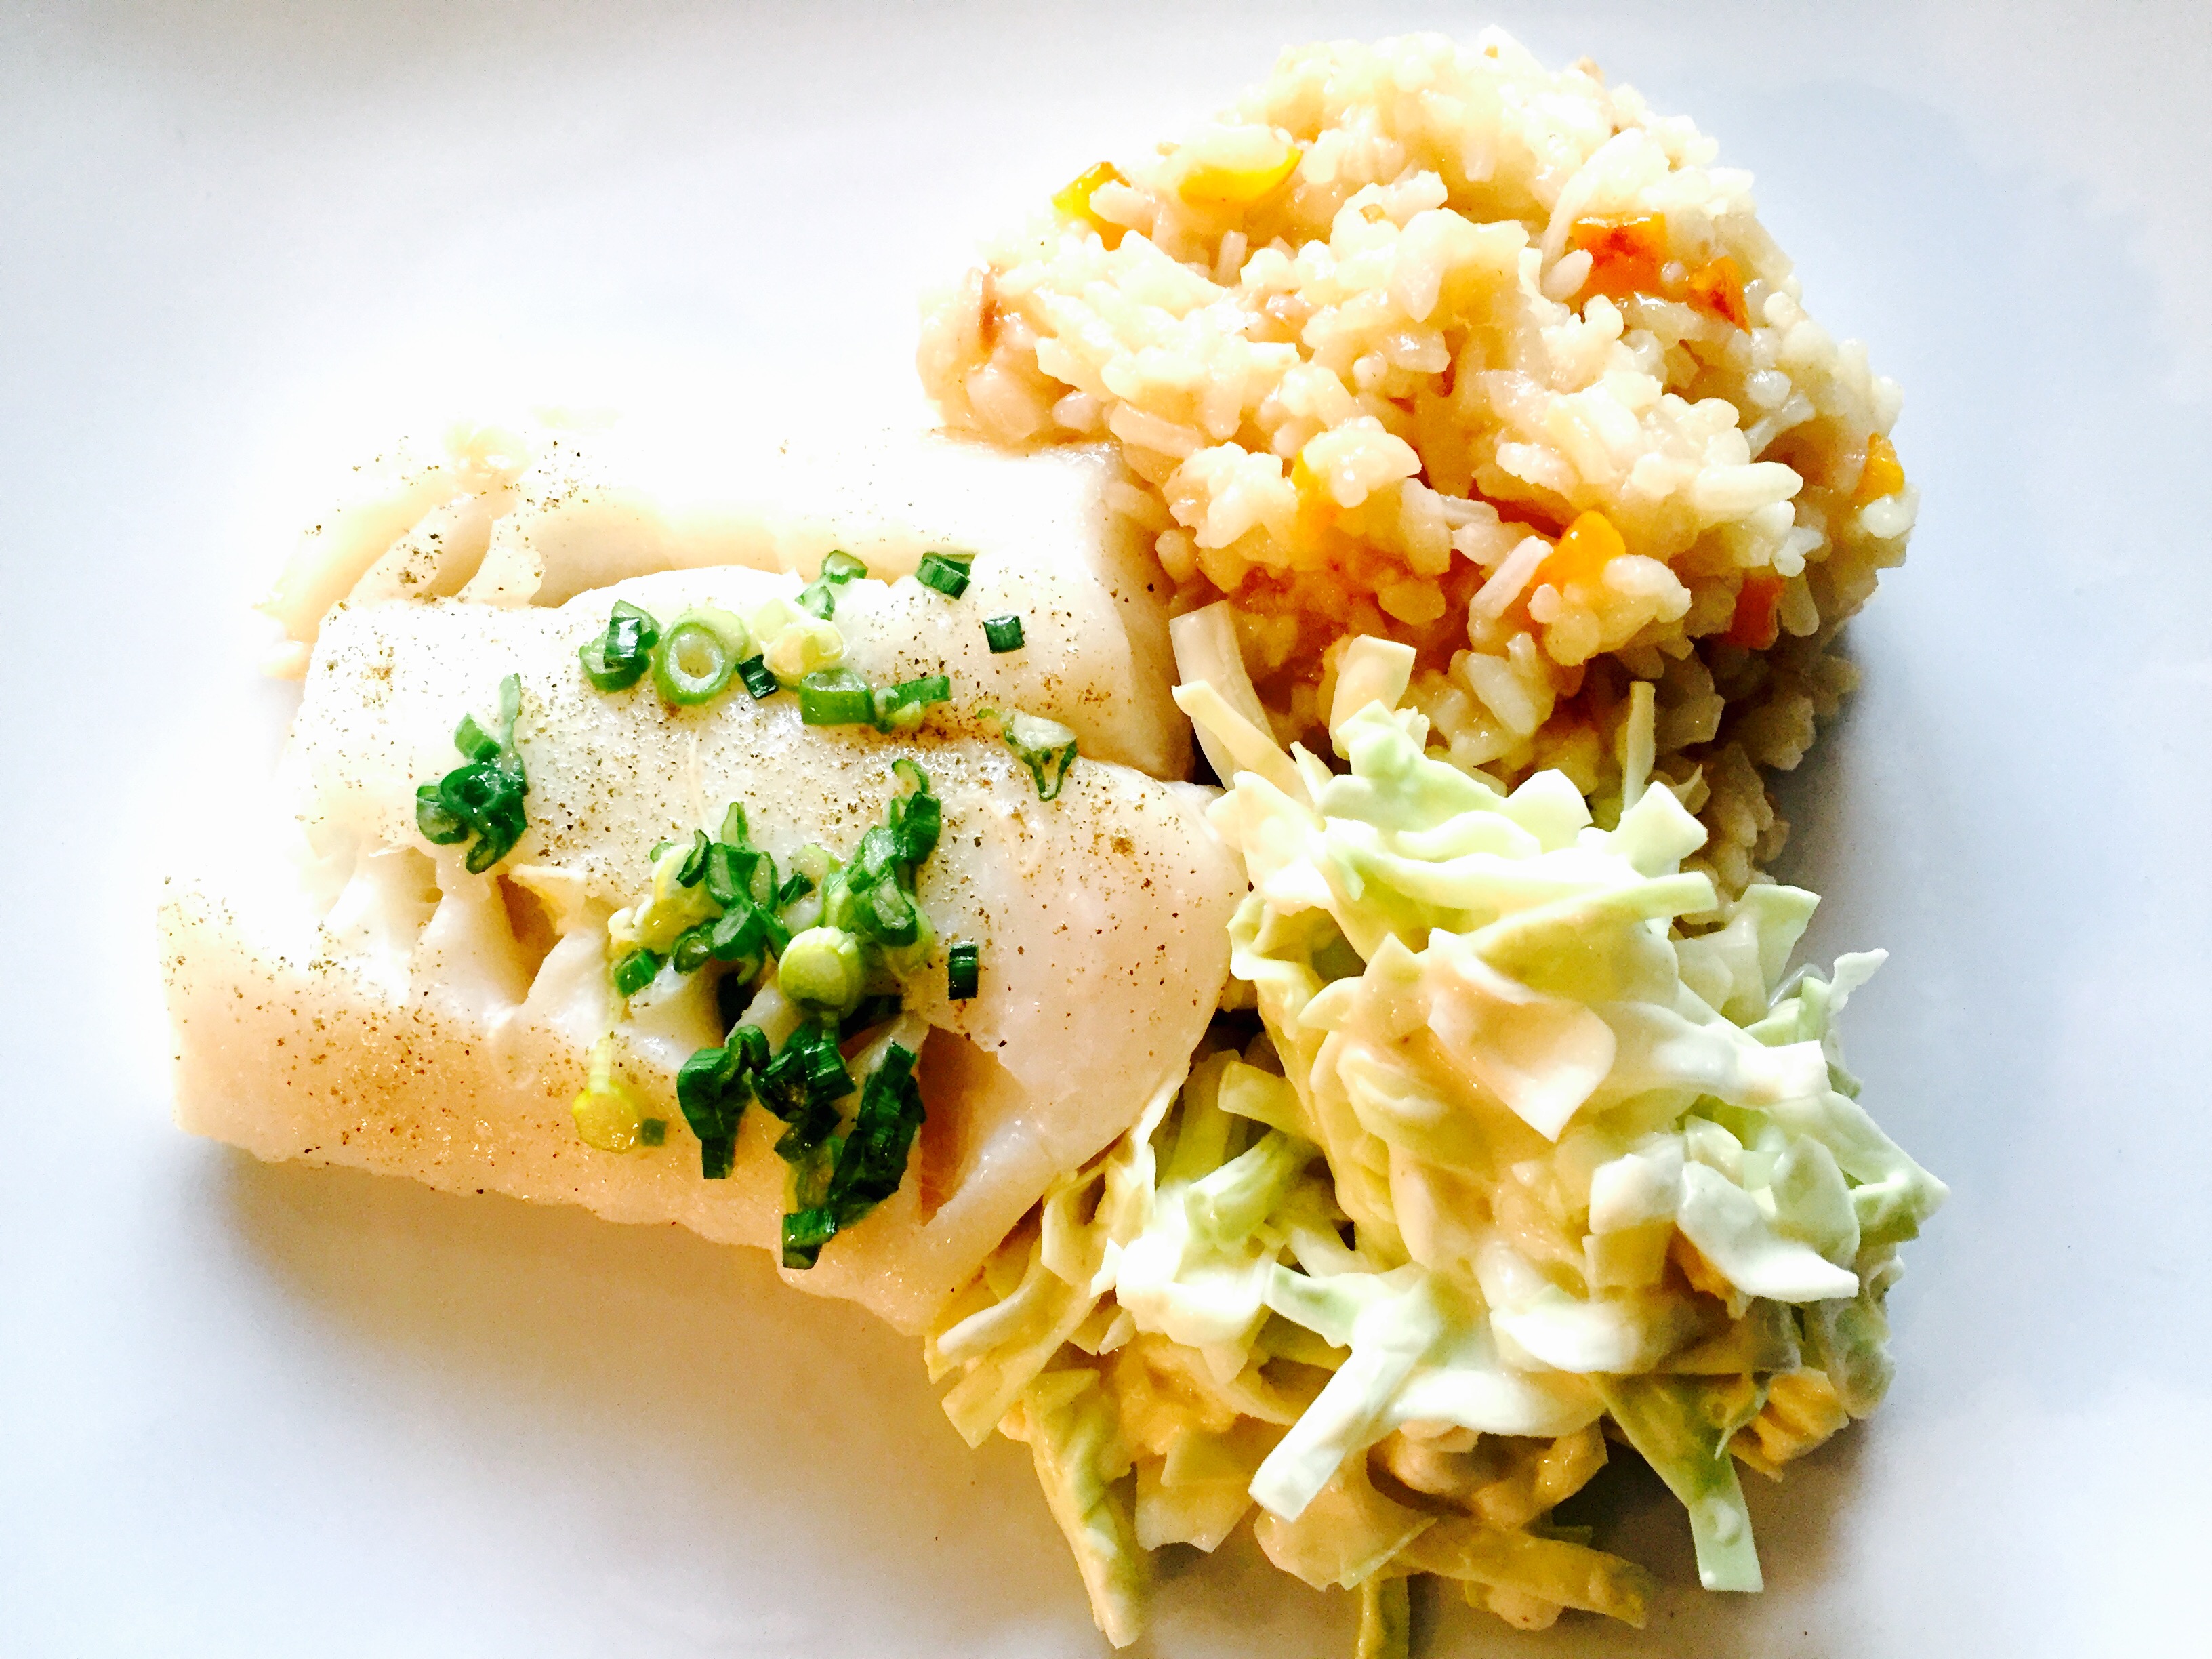 Baked cod with roasted pepper risotto and creamy coleslaw